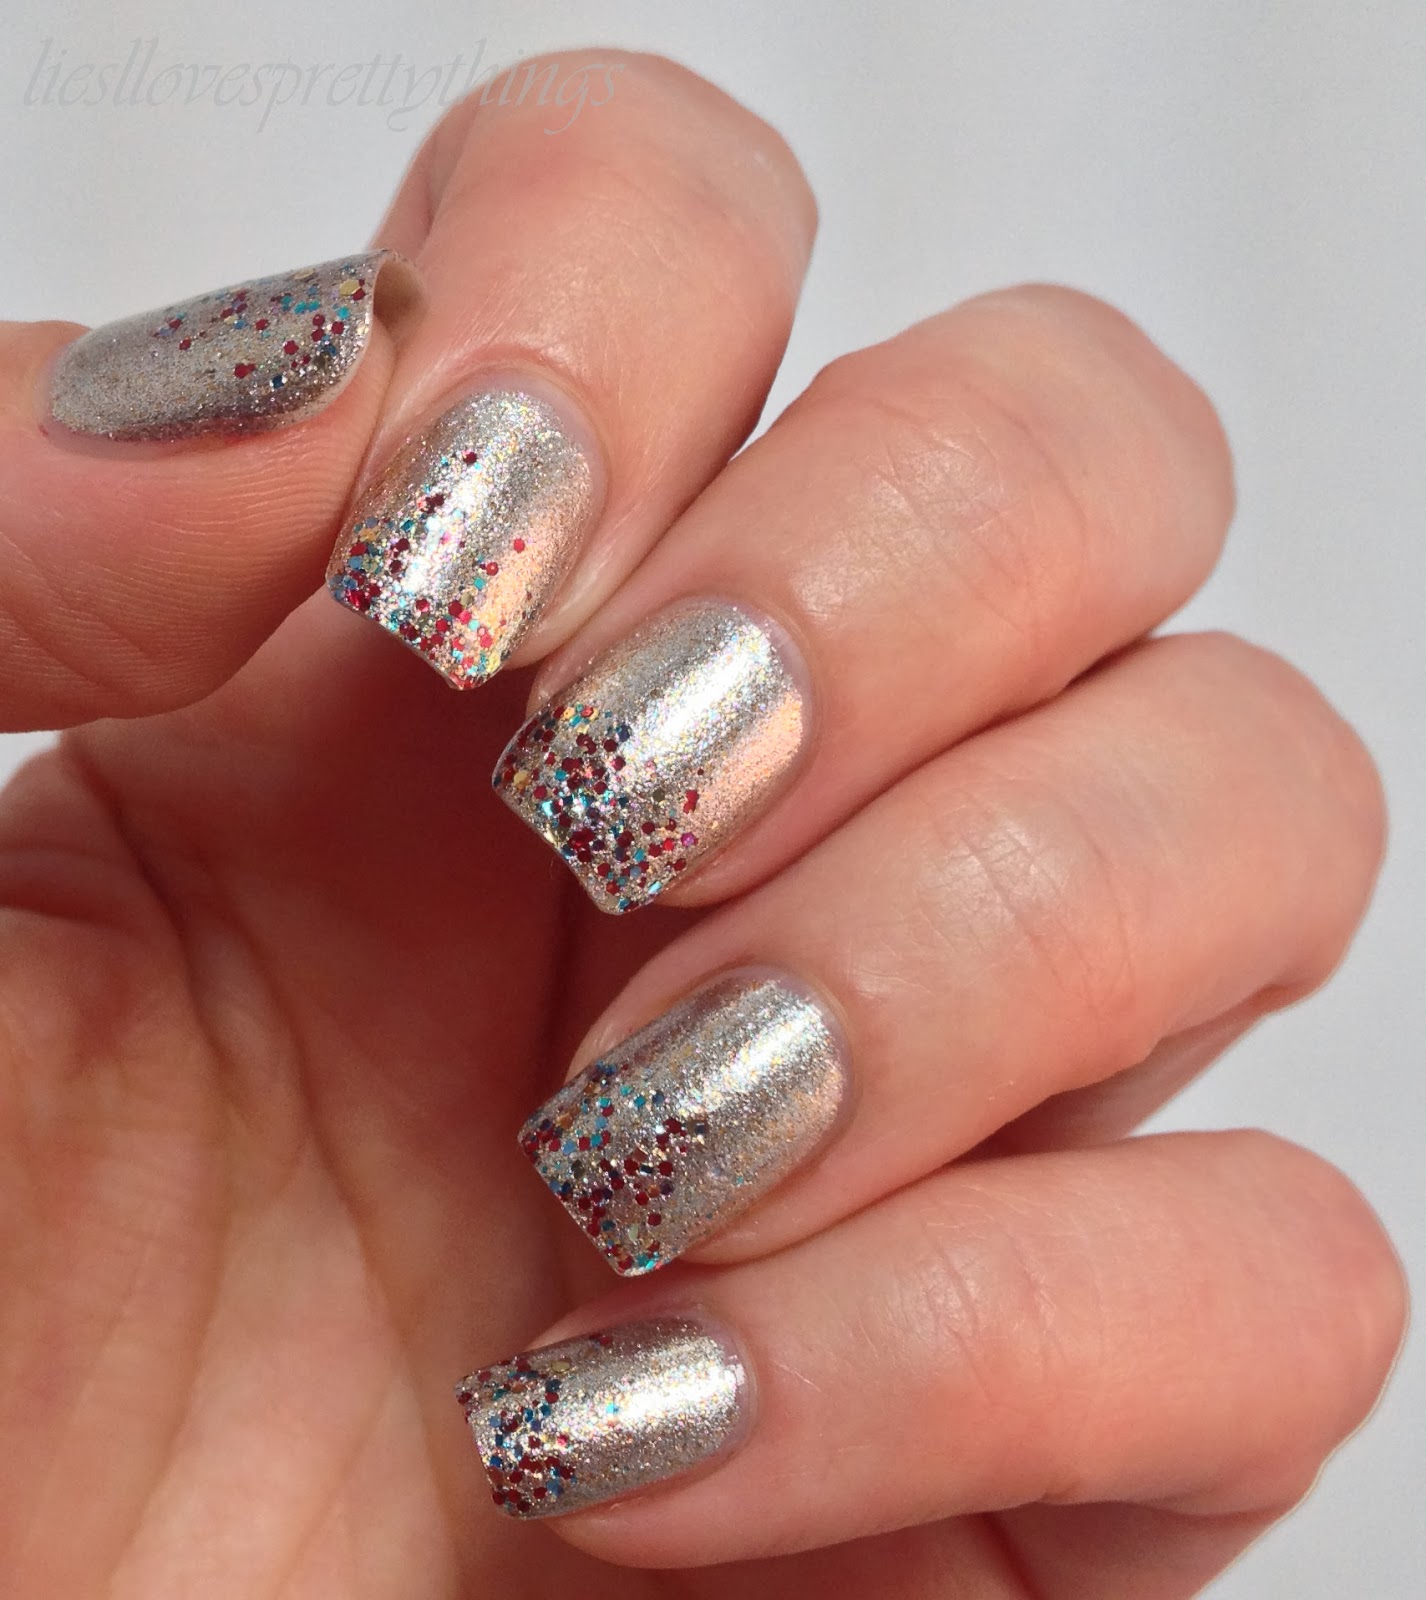 Liesl Loves Pretty Things: 12 Days of Christmas Nails!! Day 1: a ...